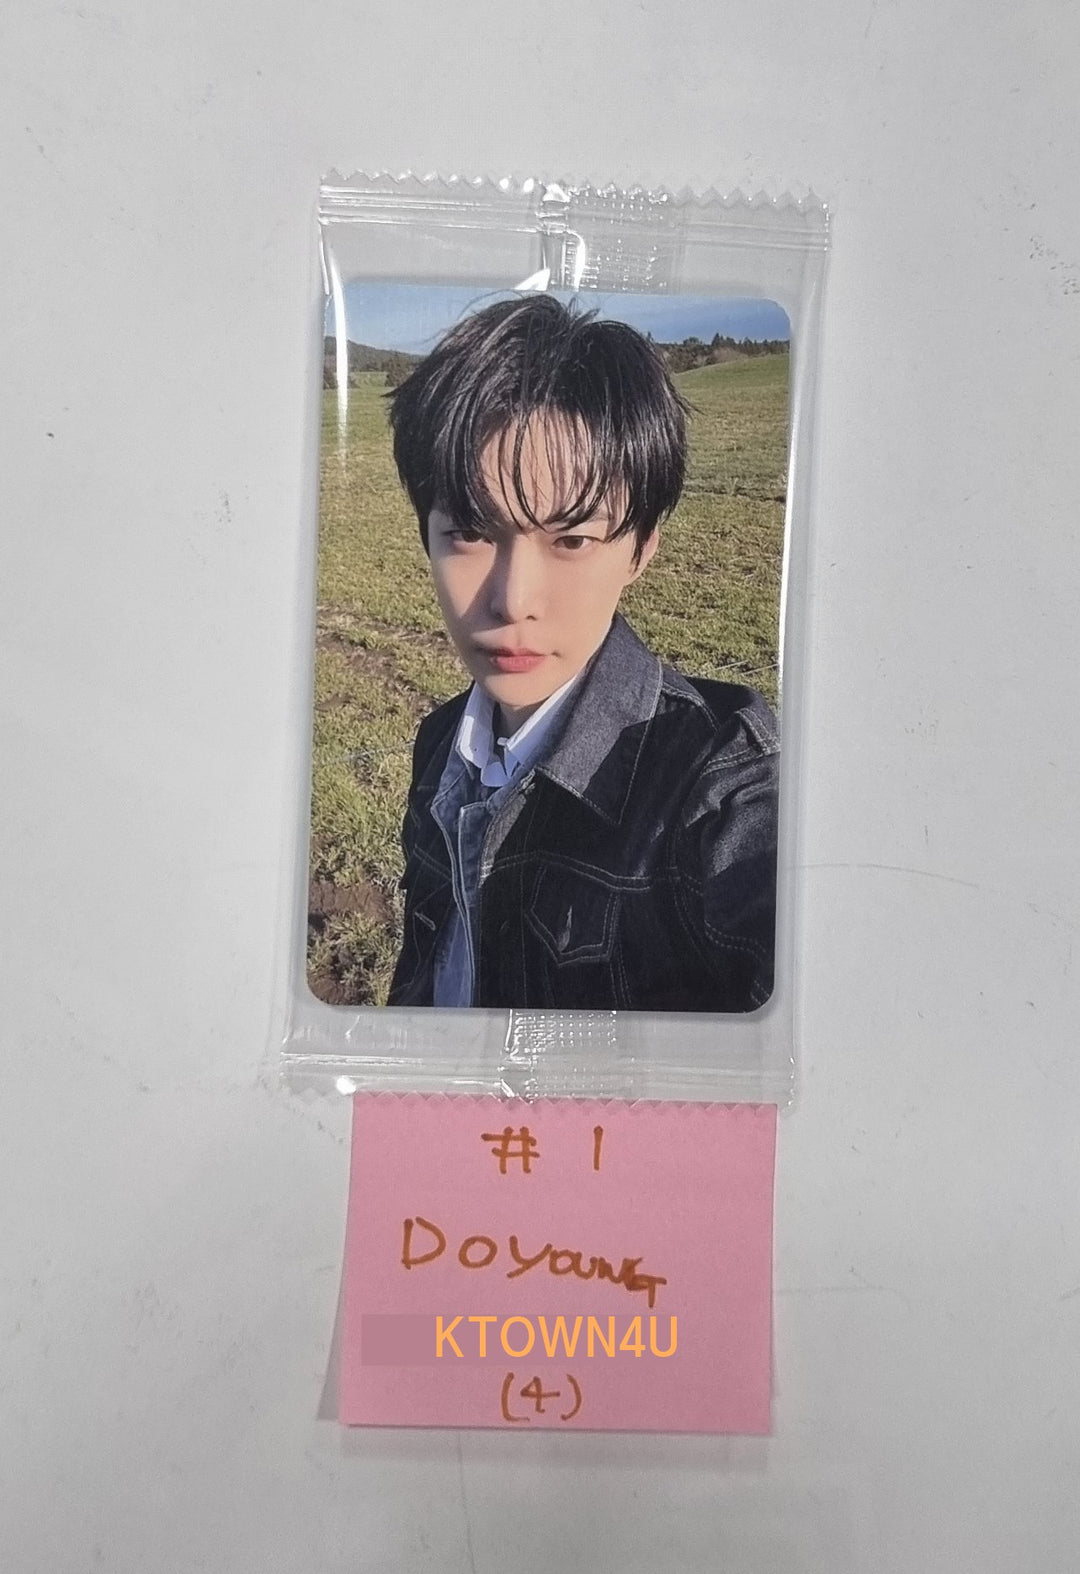 DOYOUNG (Of NCT) "YOUTH" - Ktown4U Pre-Order Benefit Photocard [24.4.25]